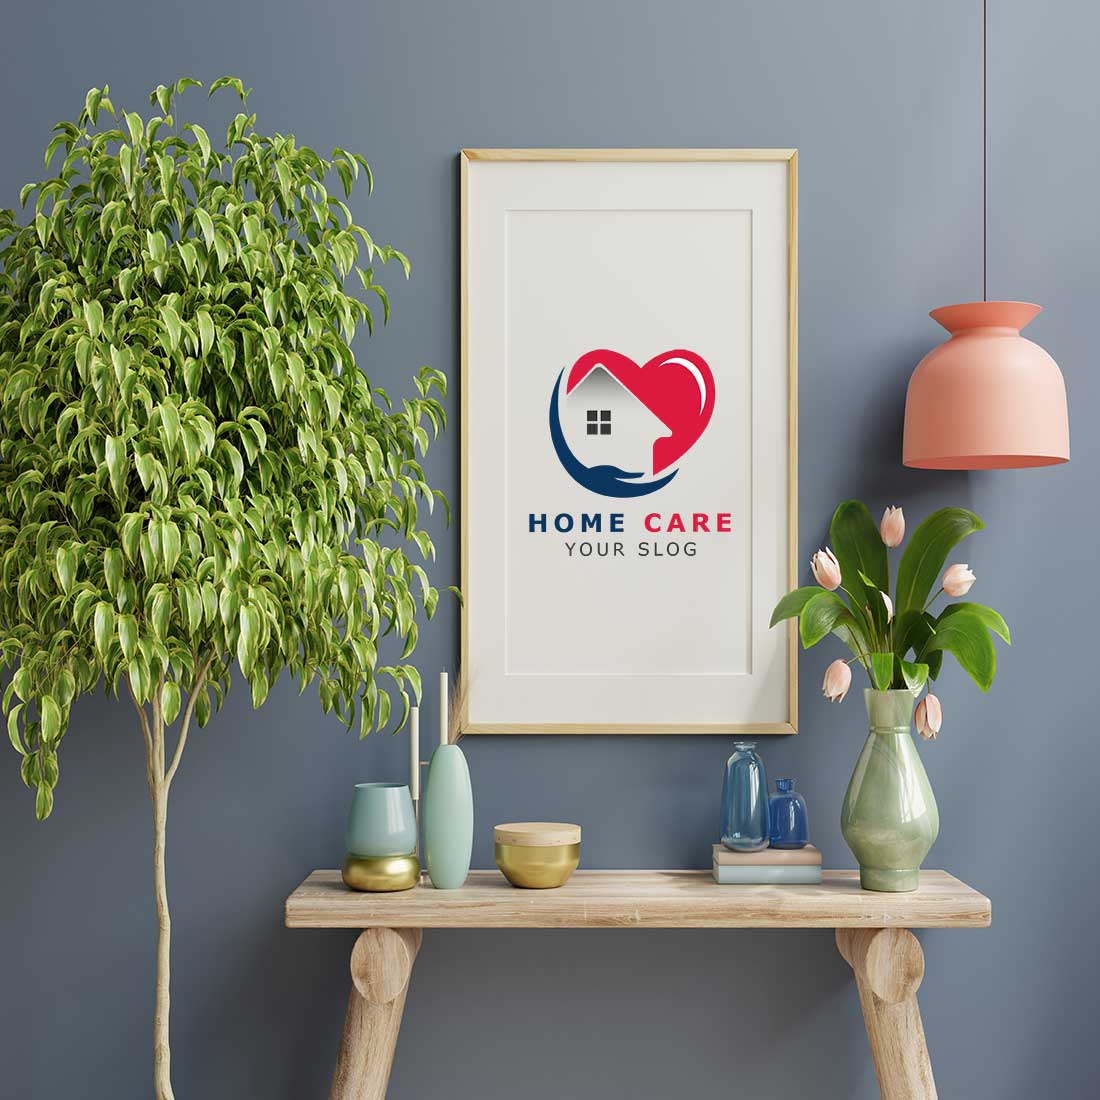 Home Care Logo picture mockup example.